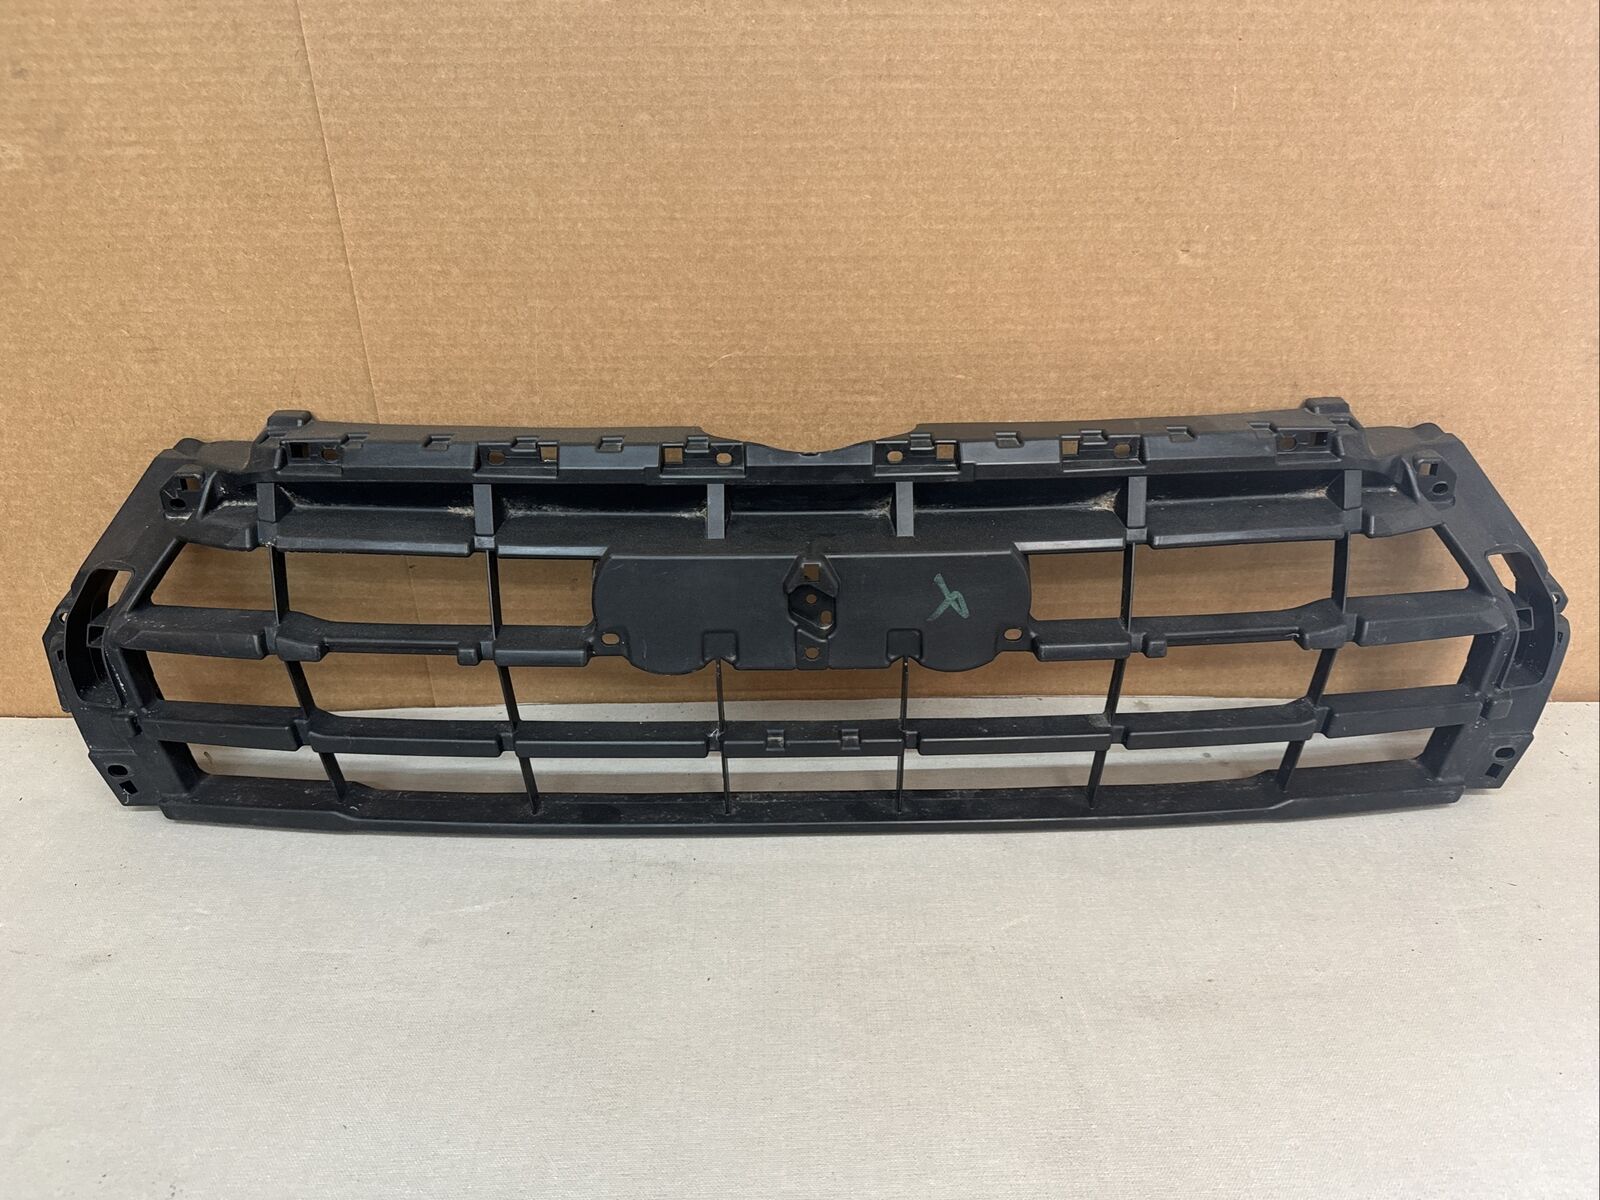 2020 2021 2022 2023 AUDI Q5 FRONT BUMPER GRILLE REINFORCEMENT PLATE OEM USED